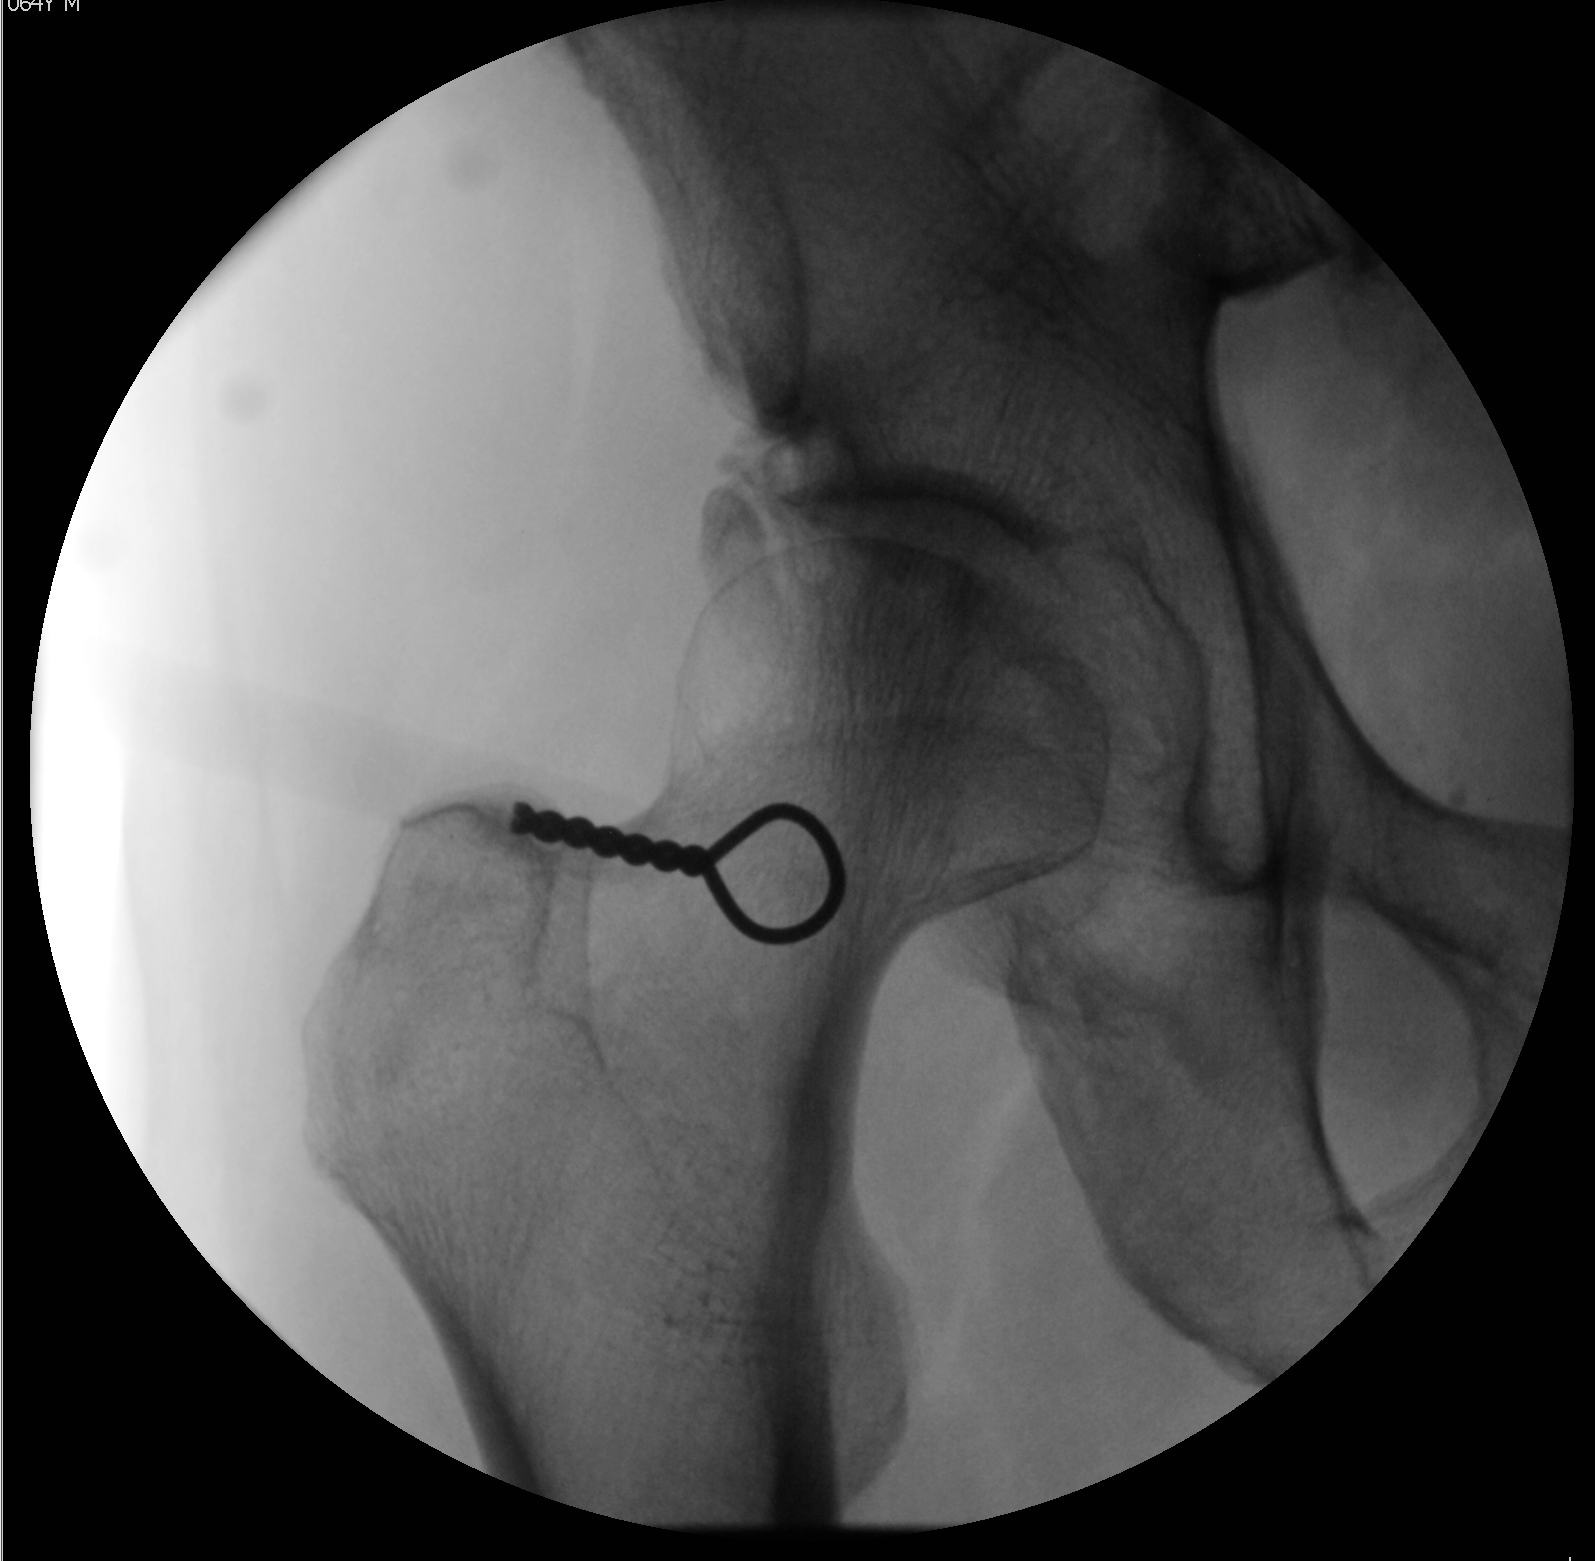 Initial fluoroscopic visualization of the hip joint